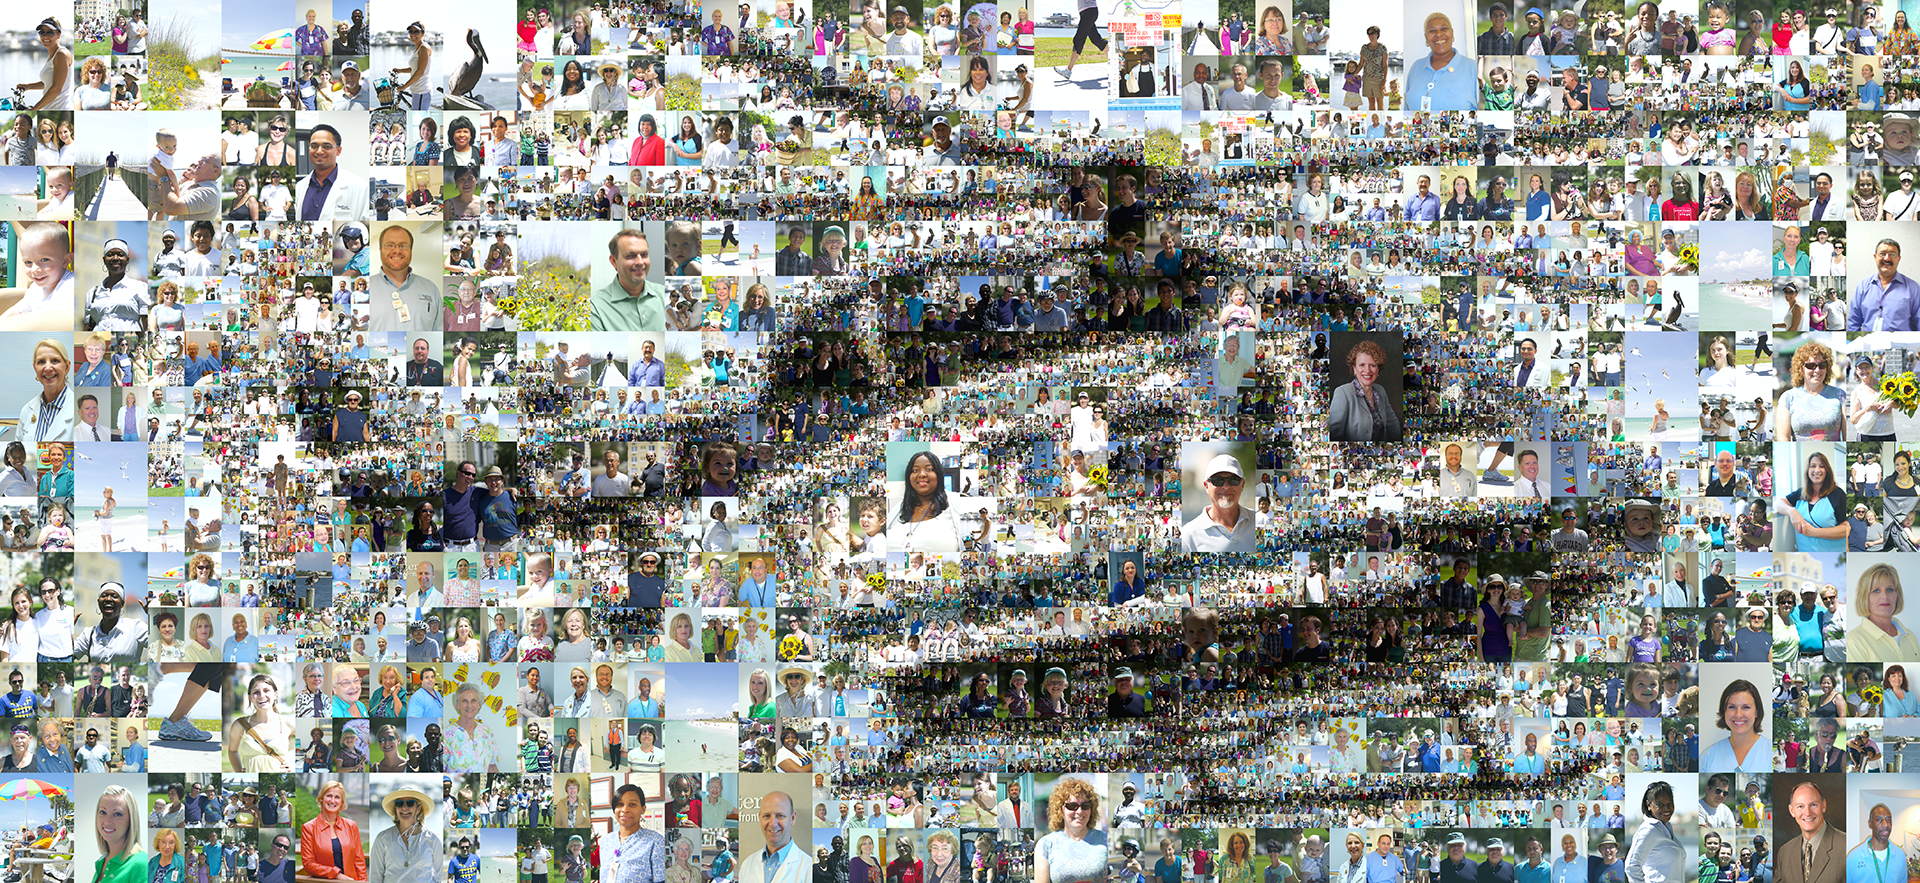 photo mosaic A multi-size cell billboard advertisement using over 600 photos of Bayfront Health System employees